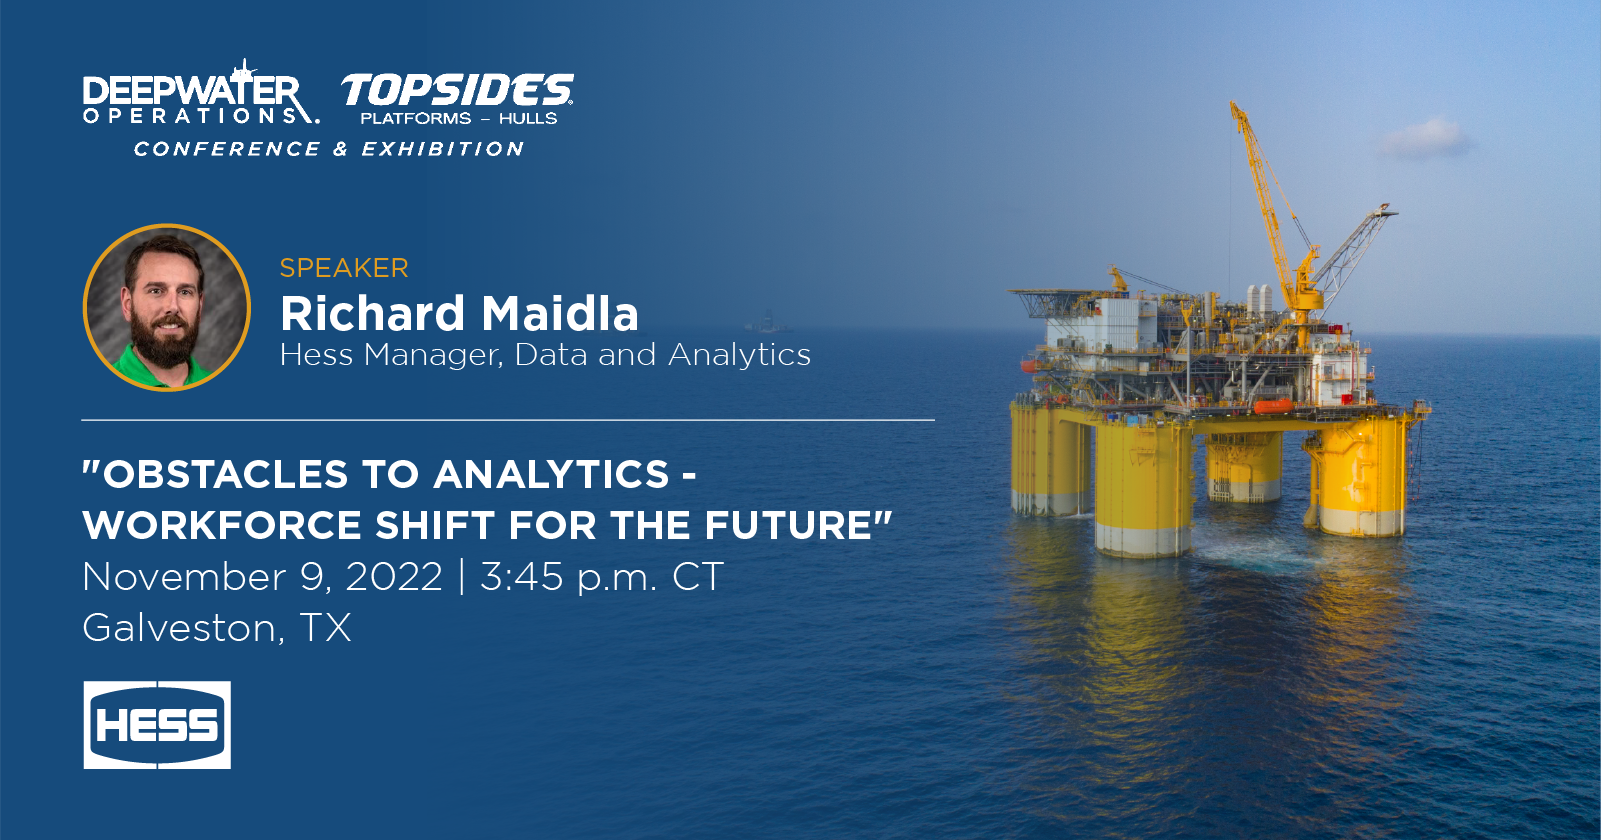 Richard Maidla Speaking at Deepwater Operations Conference and Exhibition